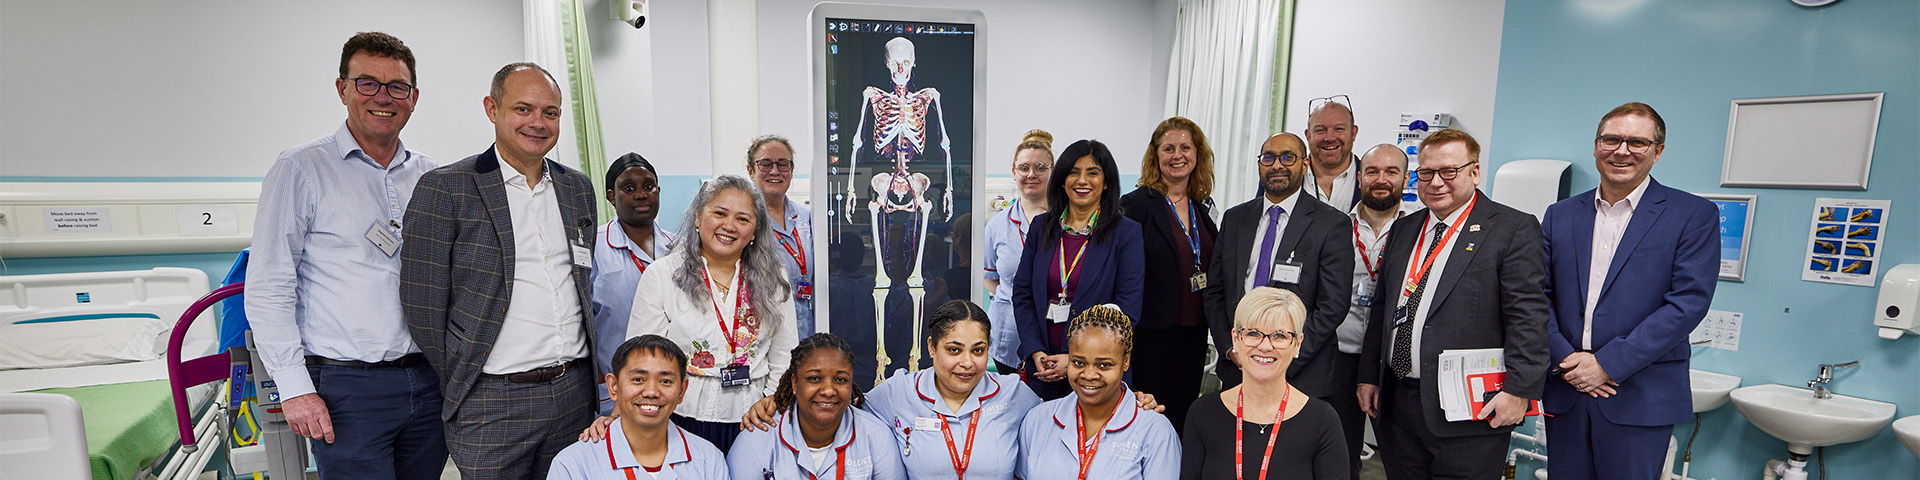 Nursing students, staff and stakeholders in Solent's Human Health Lab